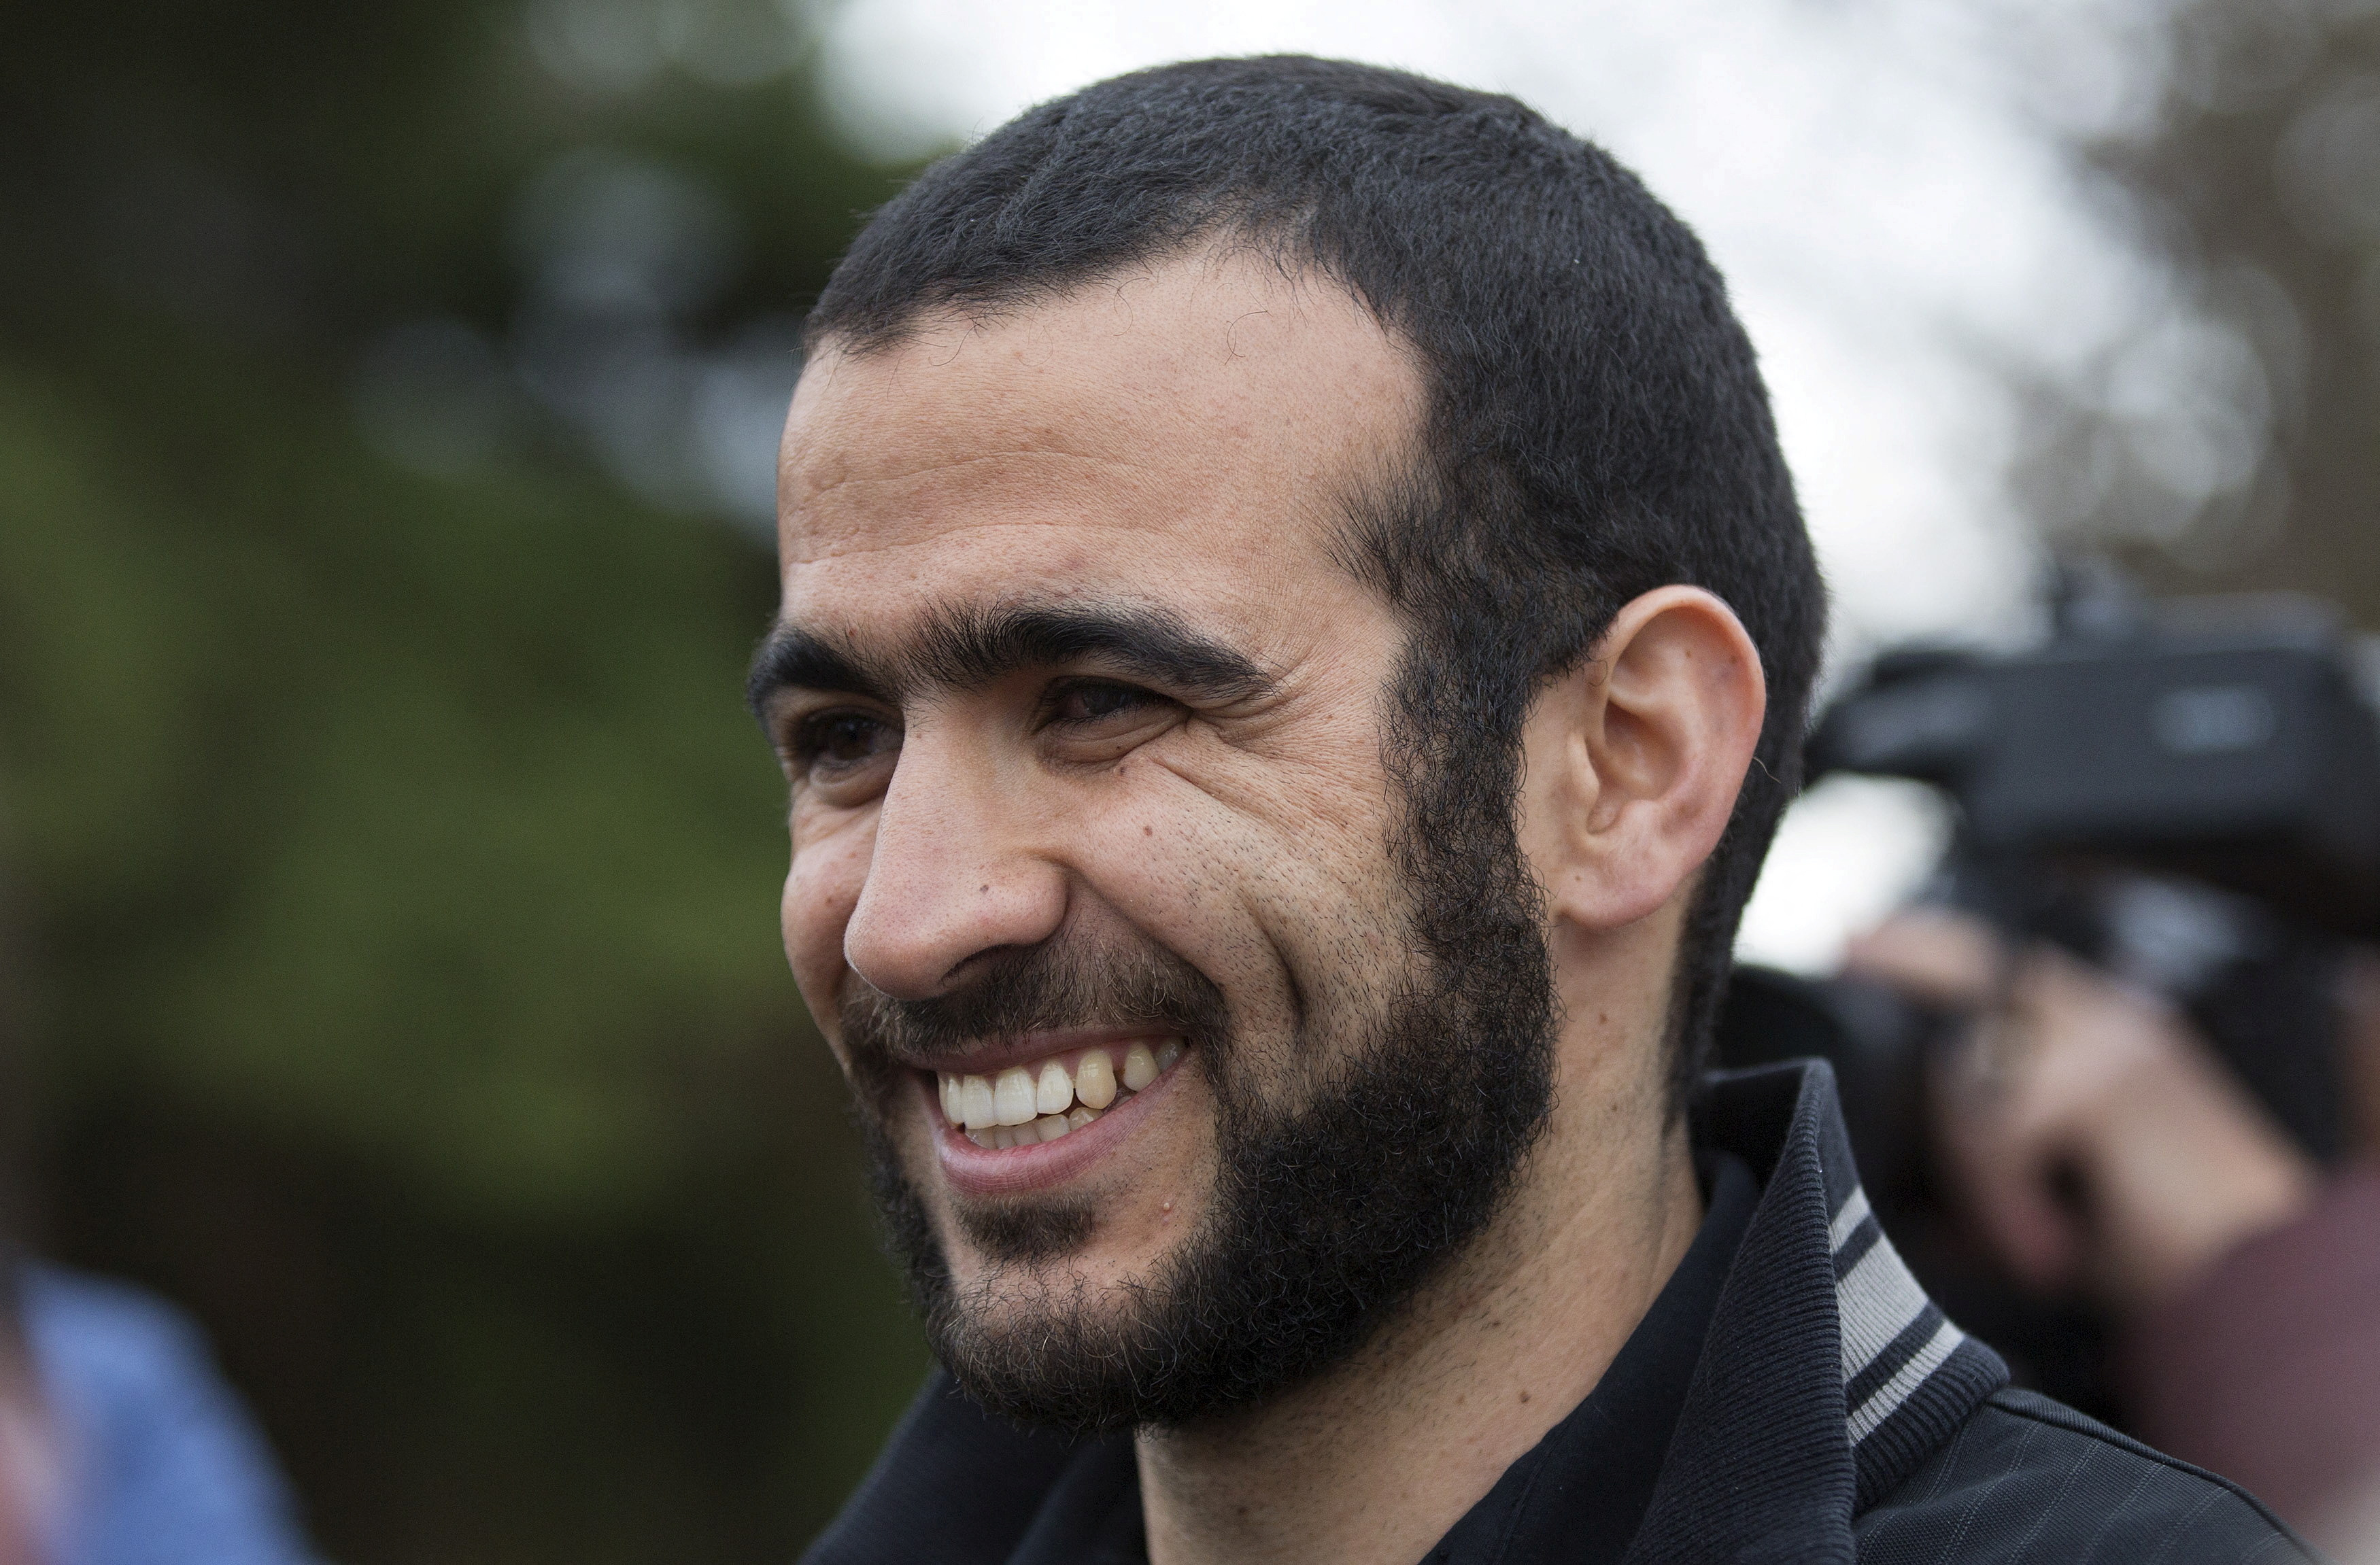 Omar Khadr smiles as he answers questions during a news conference after being released on bail in Edmonton, Alberta